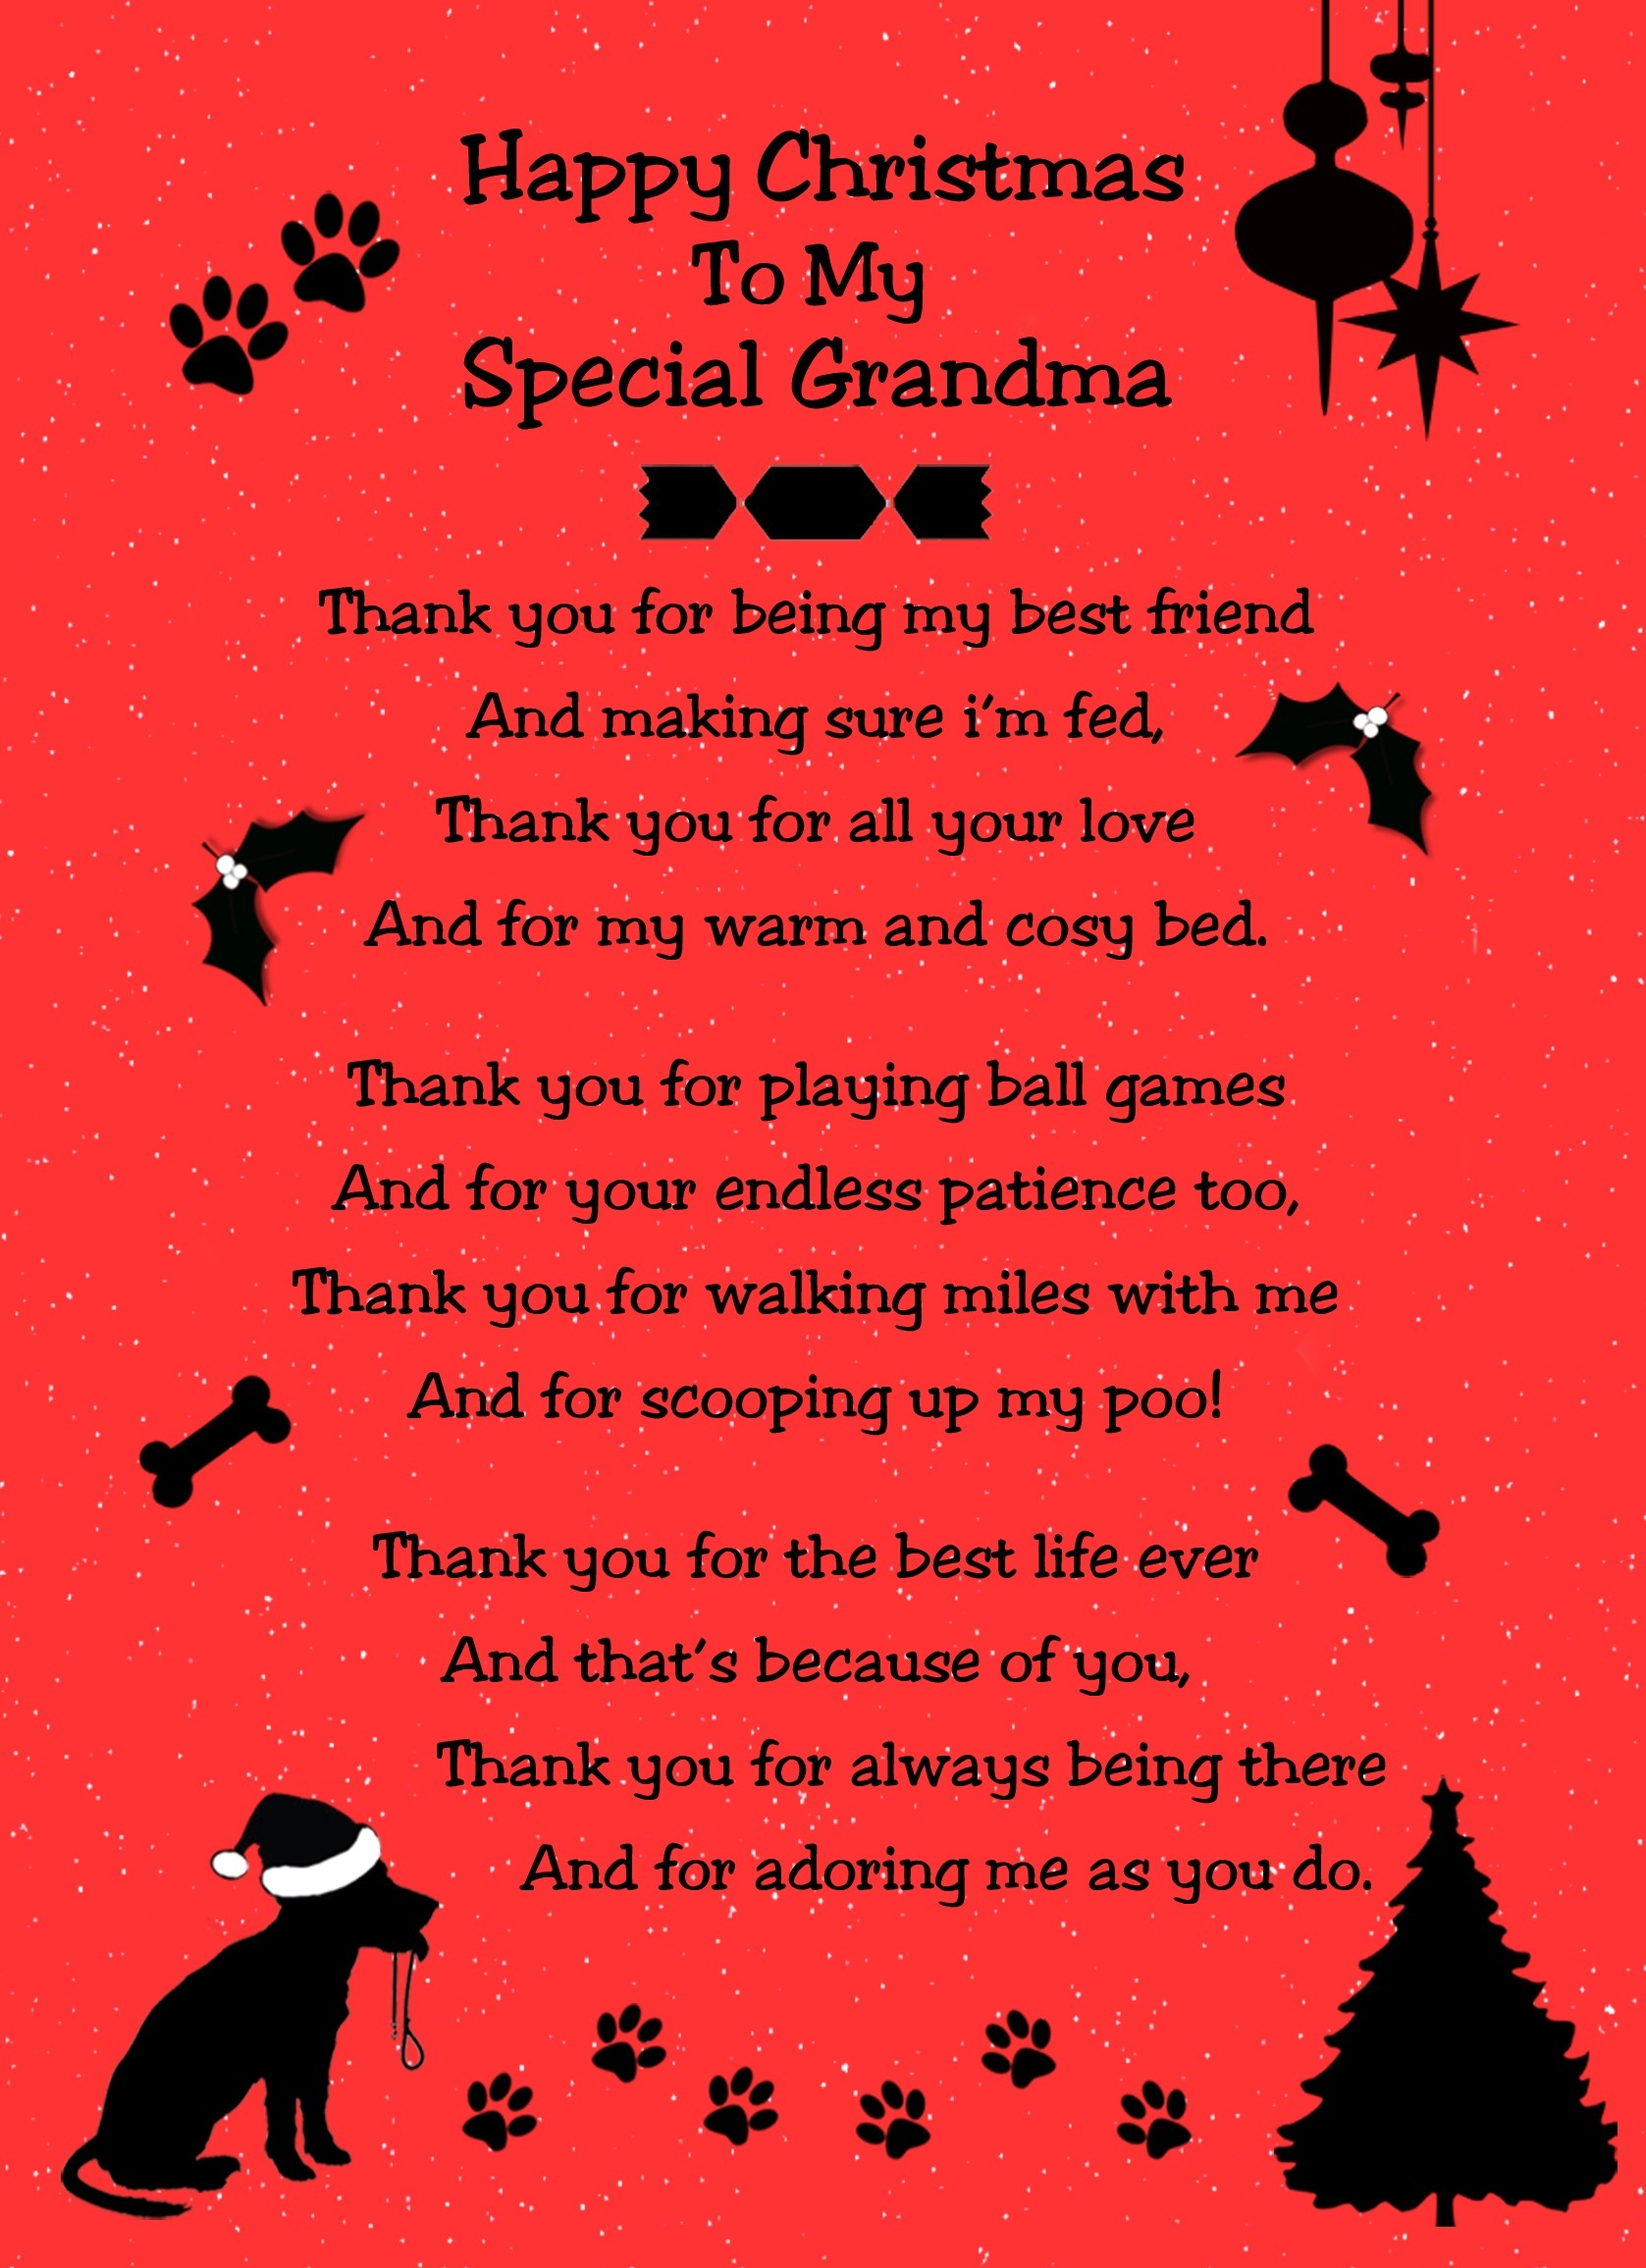 From The Dog Verse Poem Christmas Card (Special Grandma, Red, Happy Christmas)